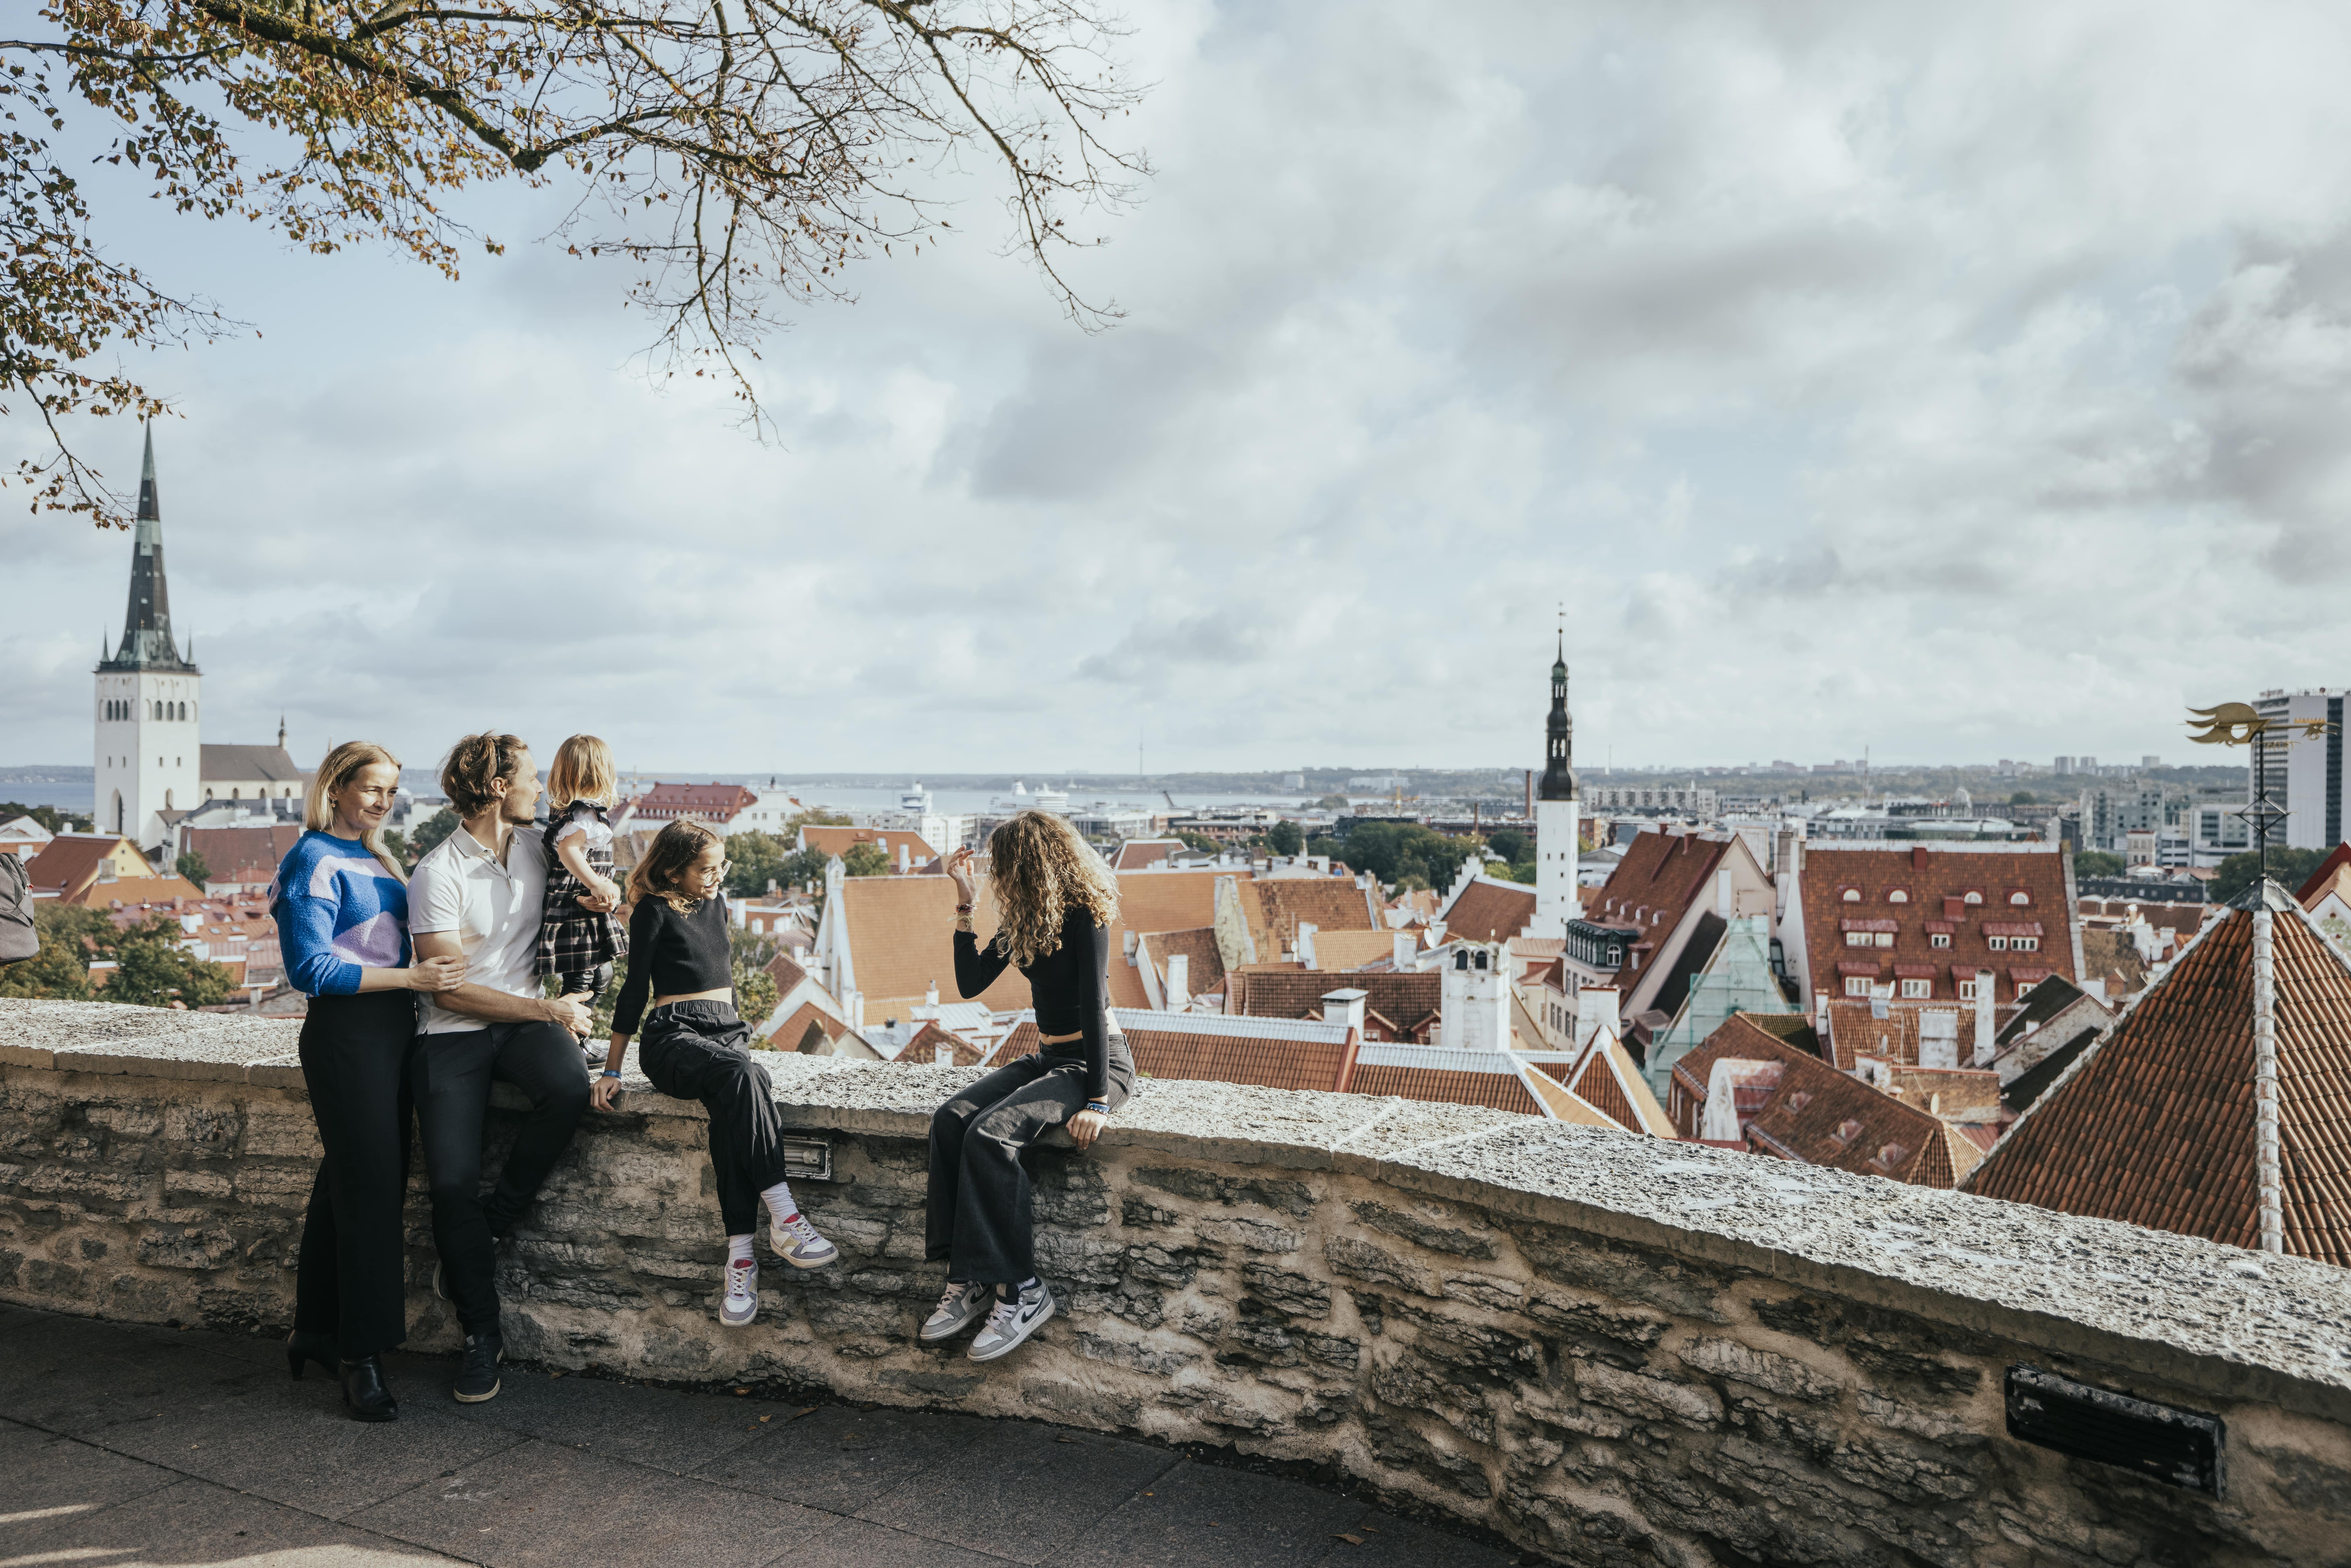 Family with three children looks out over Tallinn's skyline